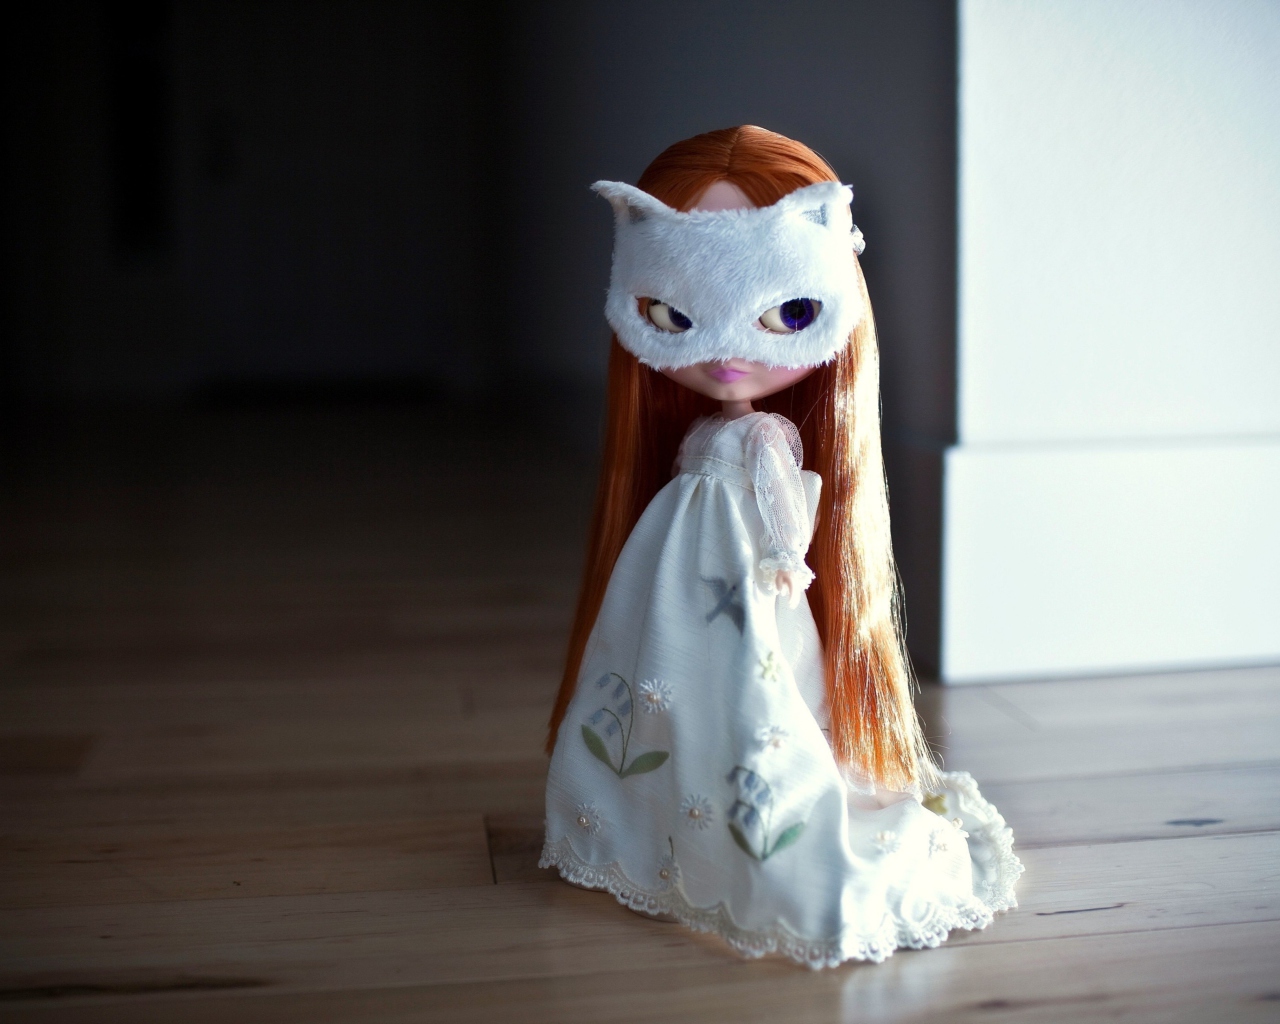 Doll With Cat Mask wallpaper 1280x1024